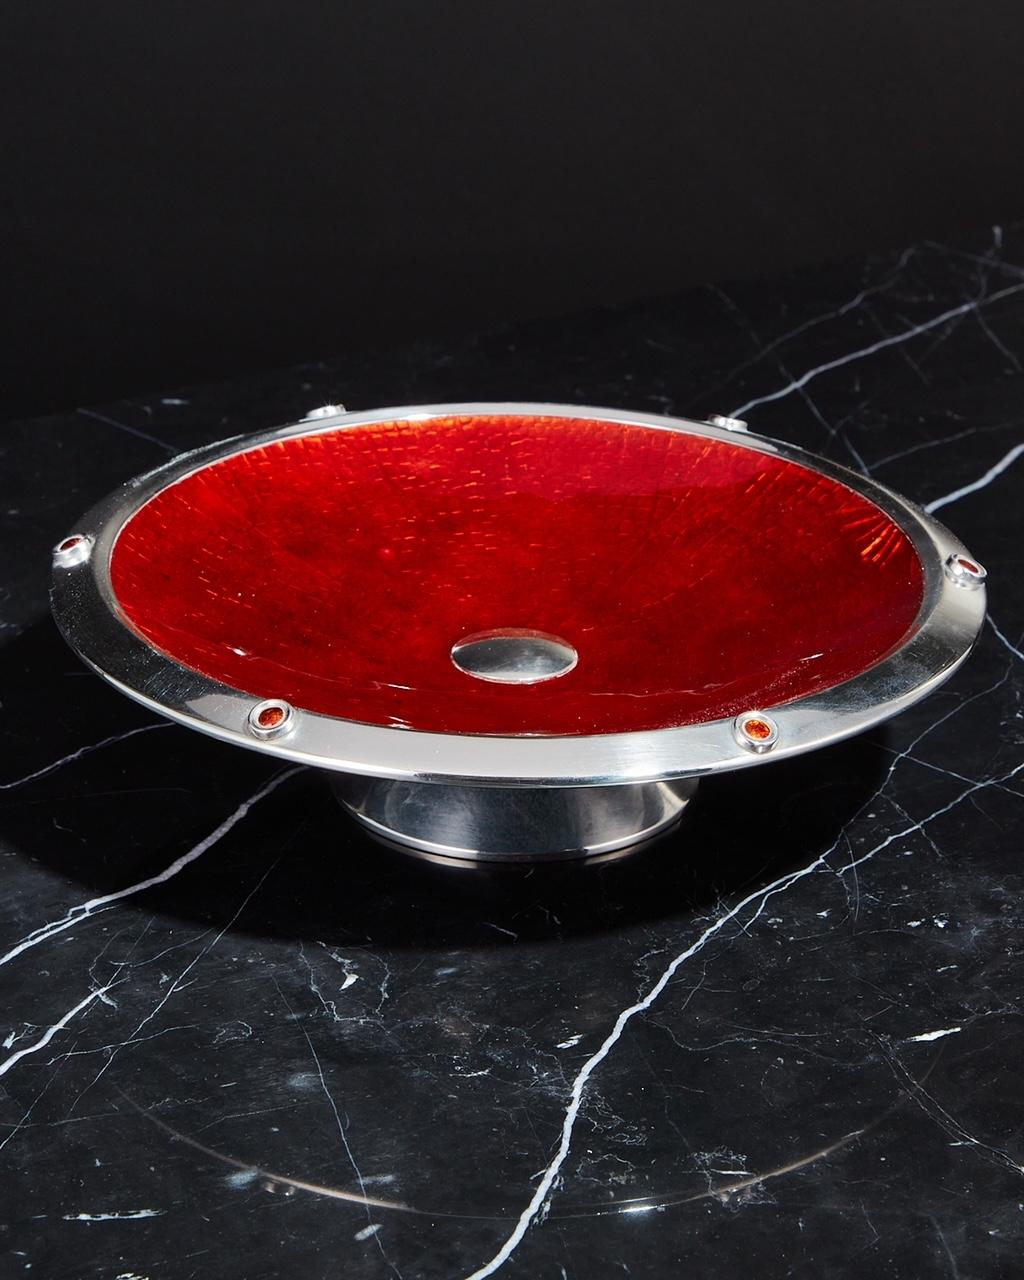 Presenting a captivating mid 20th-century Spanish Silver and Enamel Bowl, dating back to circa 1960.

The stunning red enamel, complemented by translucent enamel cabochons, enhances the beauty of this piece. 
The inner section of enamel is on copper